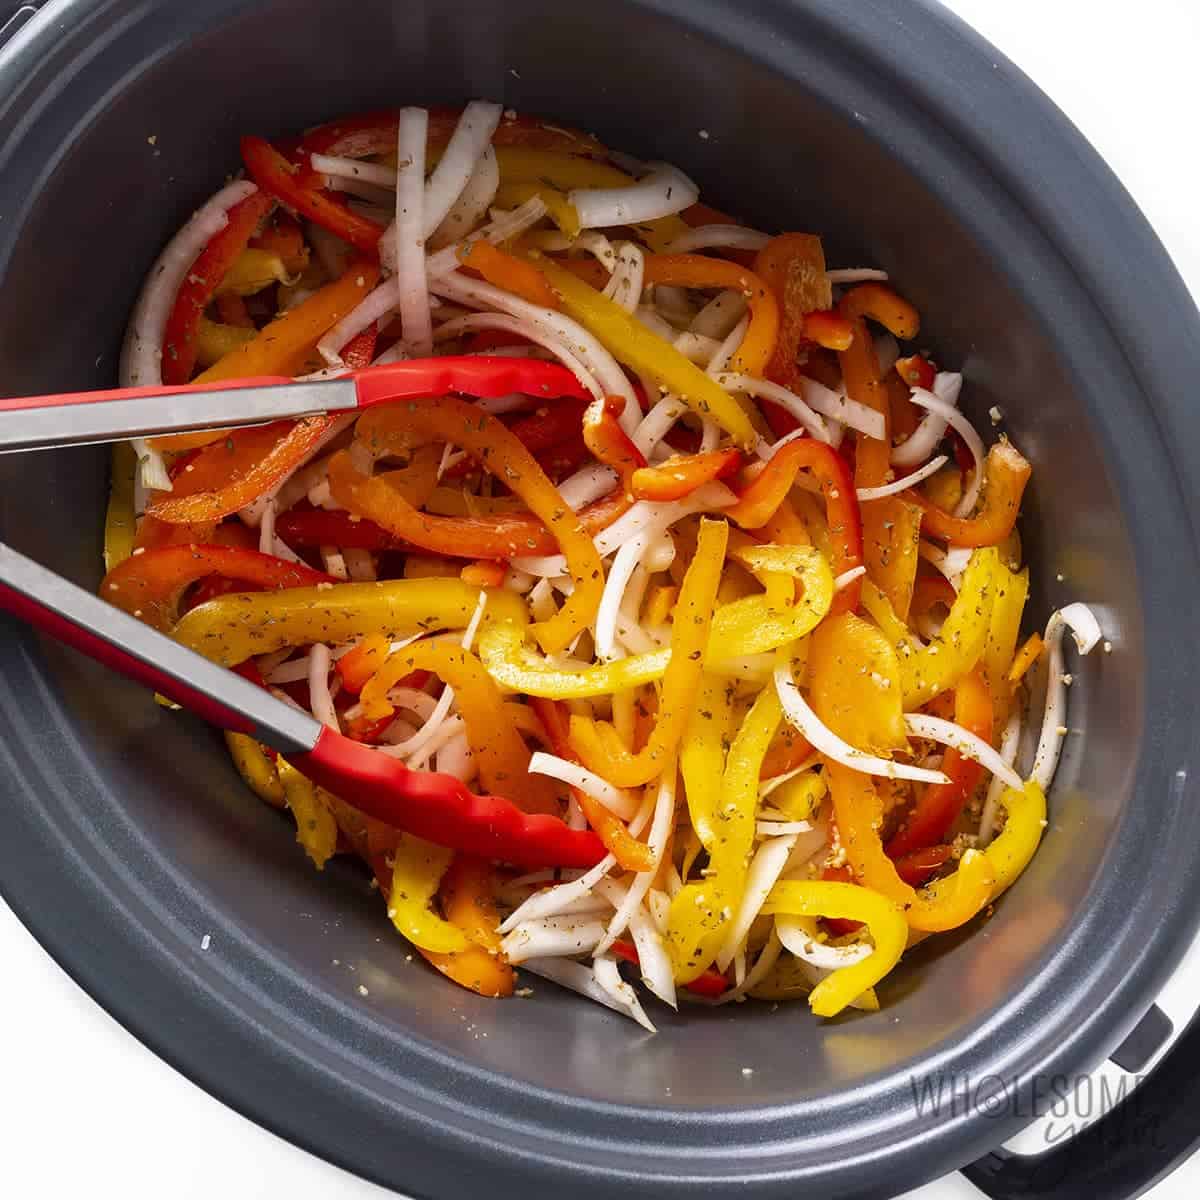 Bell peppers and onions in the slow cooker.